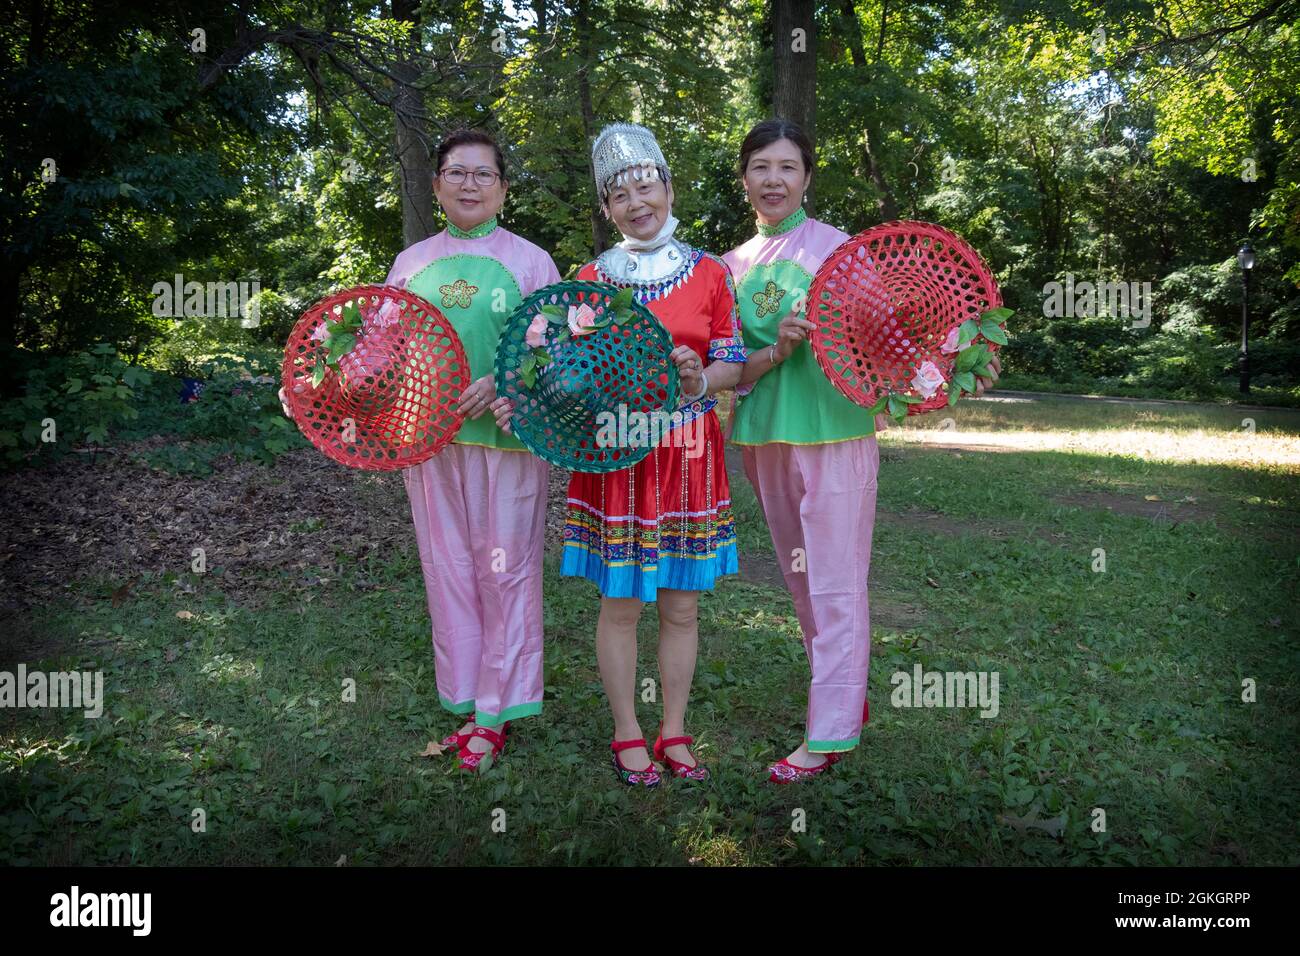 Posed portrait of three women in the Kai Xin Yizhu dance troupe. Prior to a performance in a park in Flushing, Queens, New york City Stock Photo